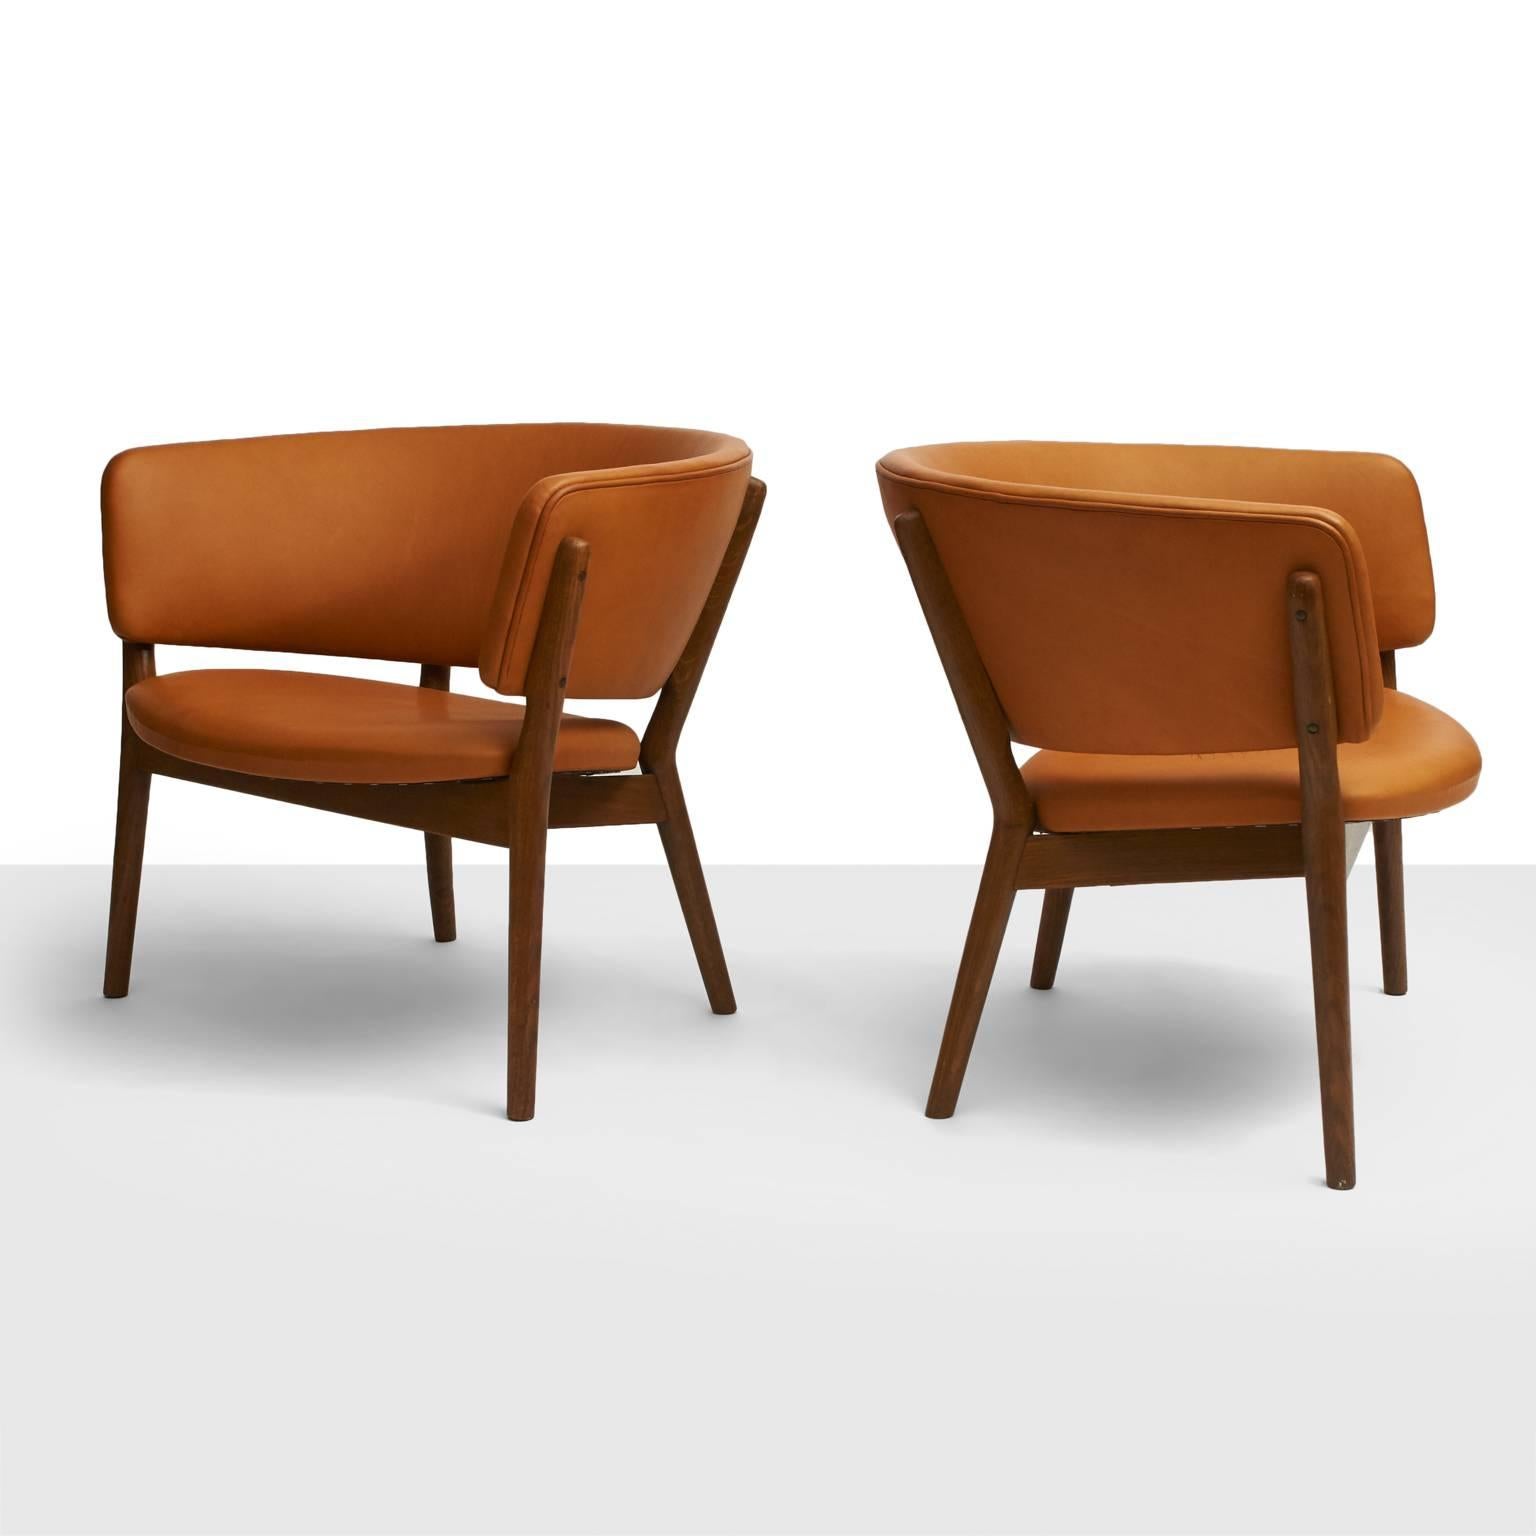 A pair of model ND83 lounge chairs. Oak frame and reupholstered in a soft, cognac aniline leather. Designed in 1952. Produced by Willadsen Møbelfabrik.
Price shown is for the pair of chairs.